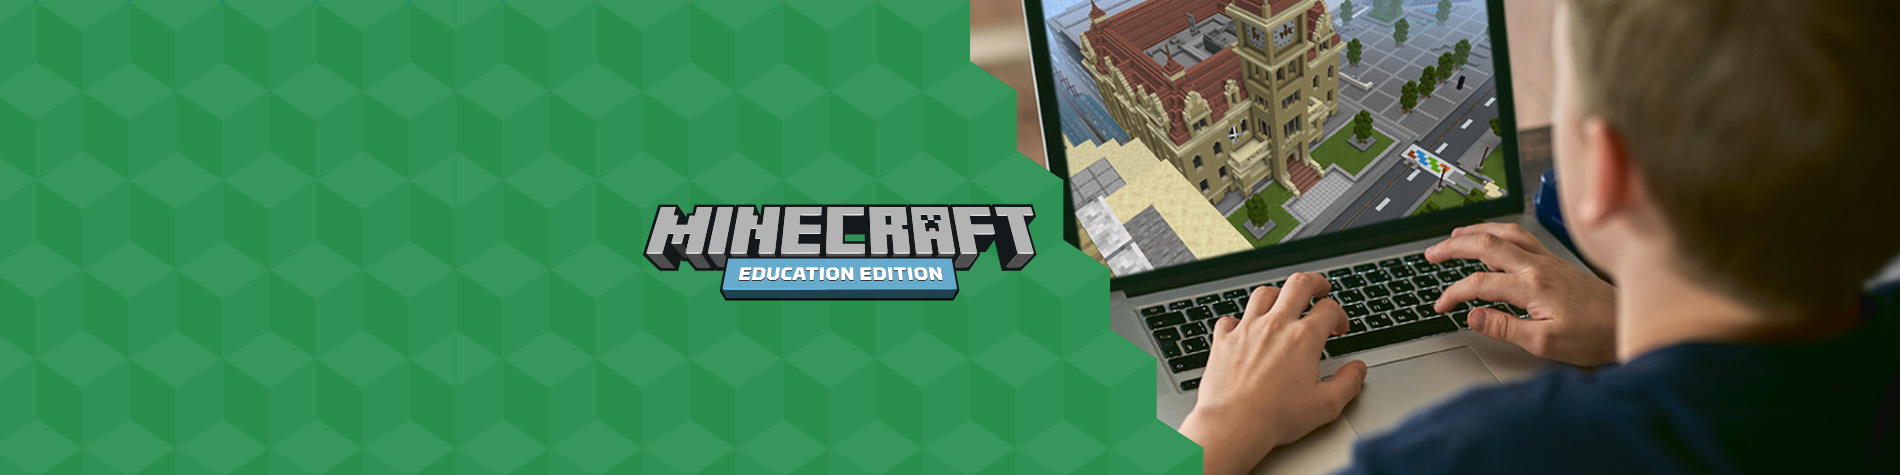 <p class="slider-title">We Levelled Up! CBE Minecraft Design Challenge a Success</p><div class="banner-line"></div><p class="slider-subtitle">Check out a video from participants and discover what’s next!</p> <a style="pointer-events:all" class=AEBannerMoreLink href="https://cbe.ab.ca/news-centre/Pages/we-levelled-up-minecraft-design-challenge-2021.aspx">Read More</a>